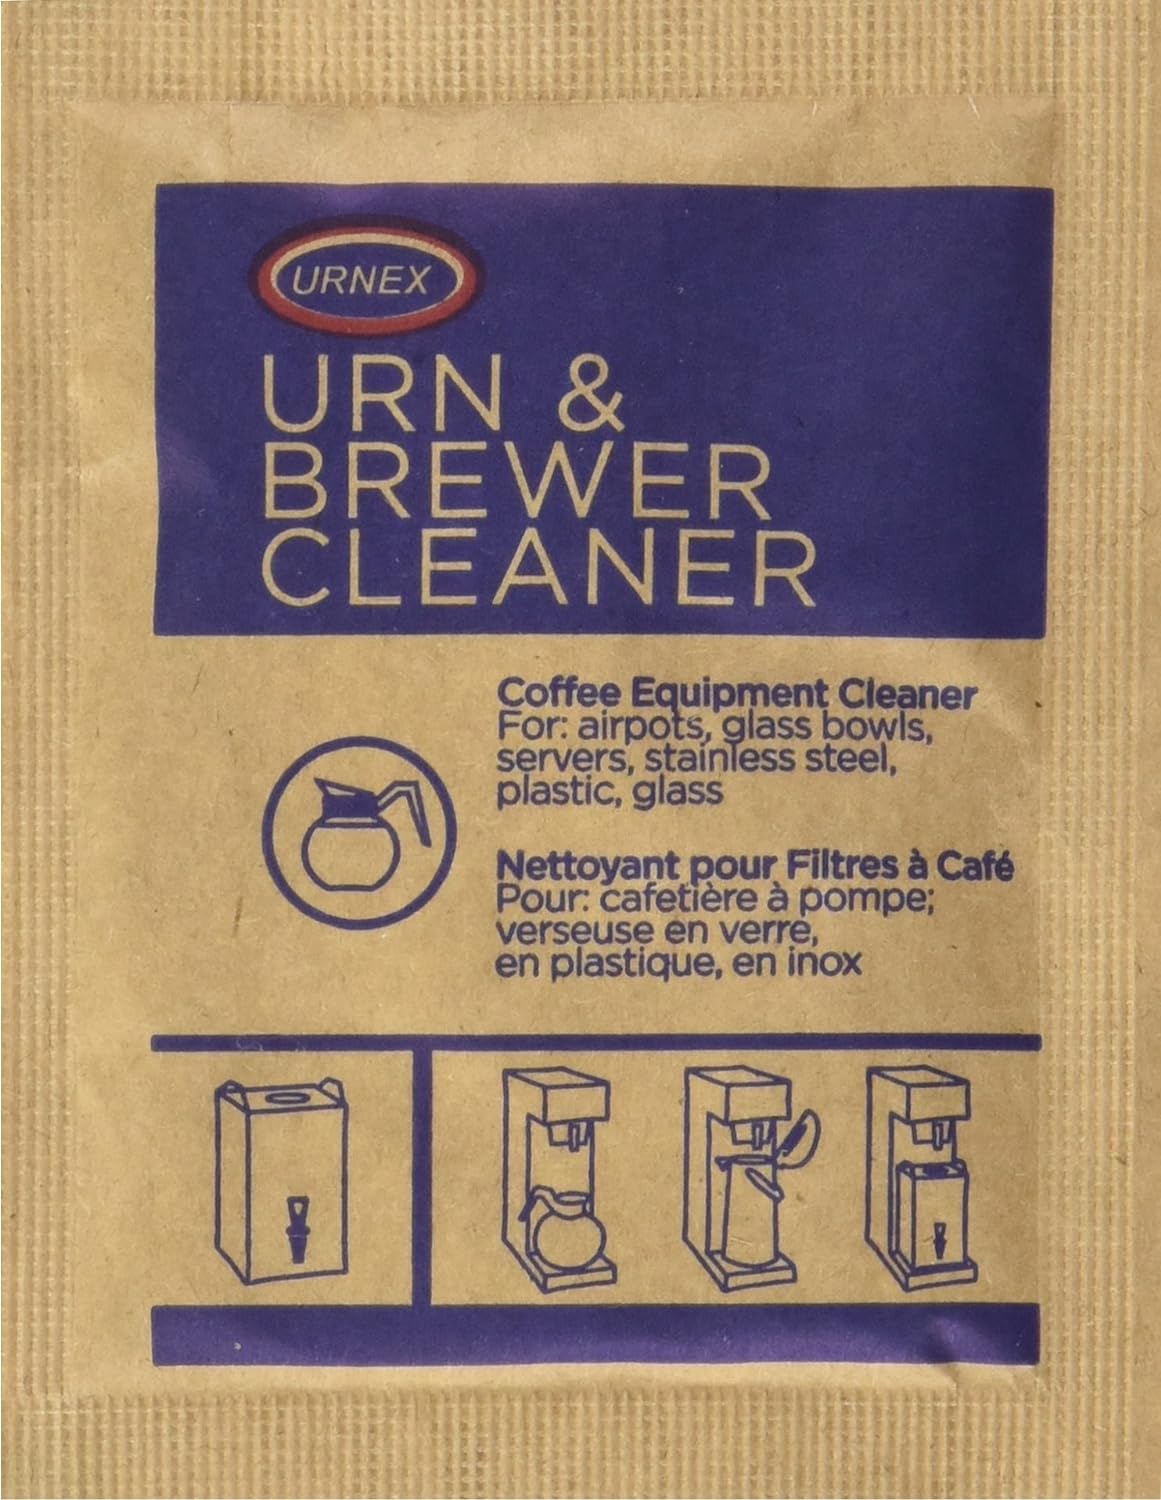 Generic Urnex Original Urn and Brewer Cleaner - 100 (1 Ounce Packets) - Professional Coffee Equipment Cleaner for Air Pot Glass Bowl Se